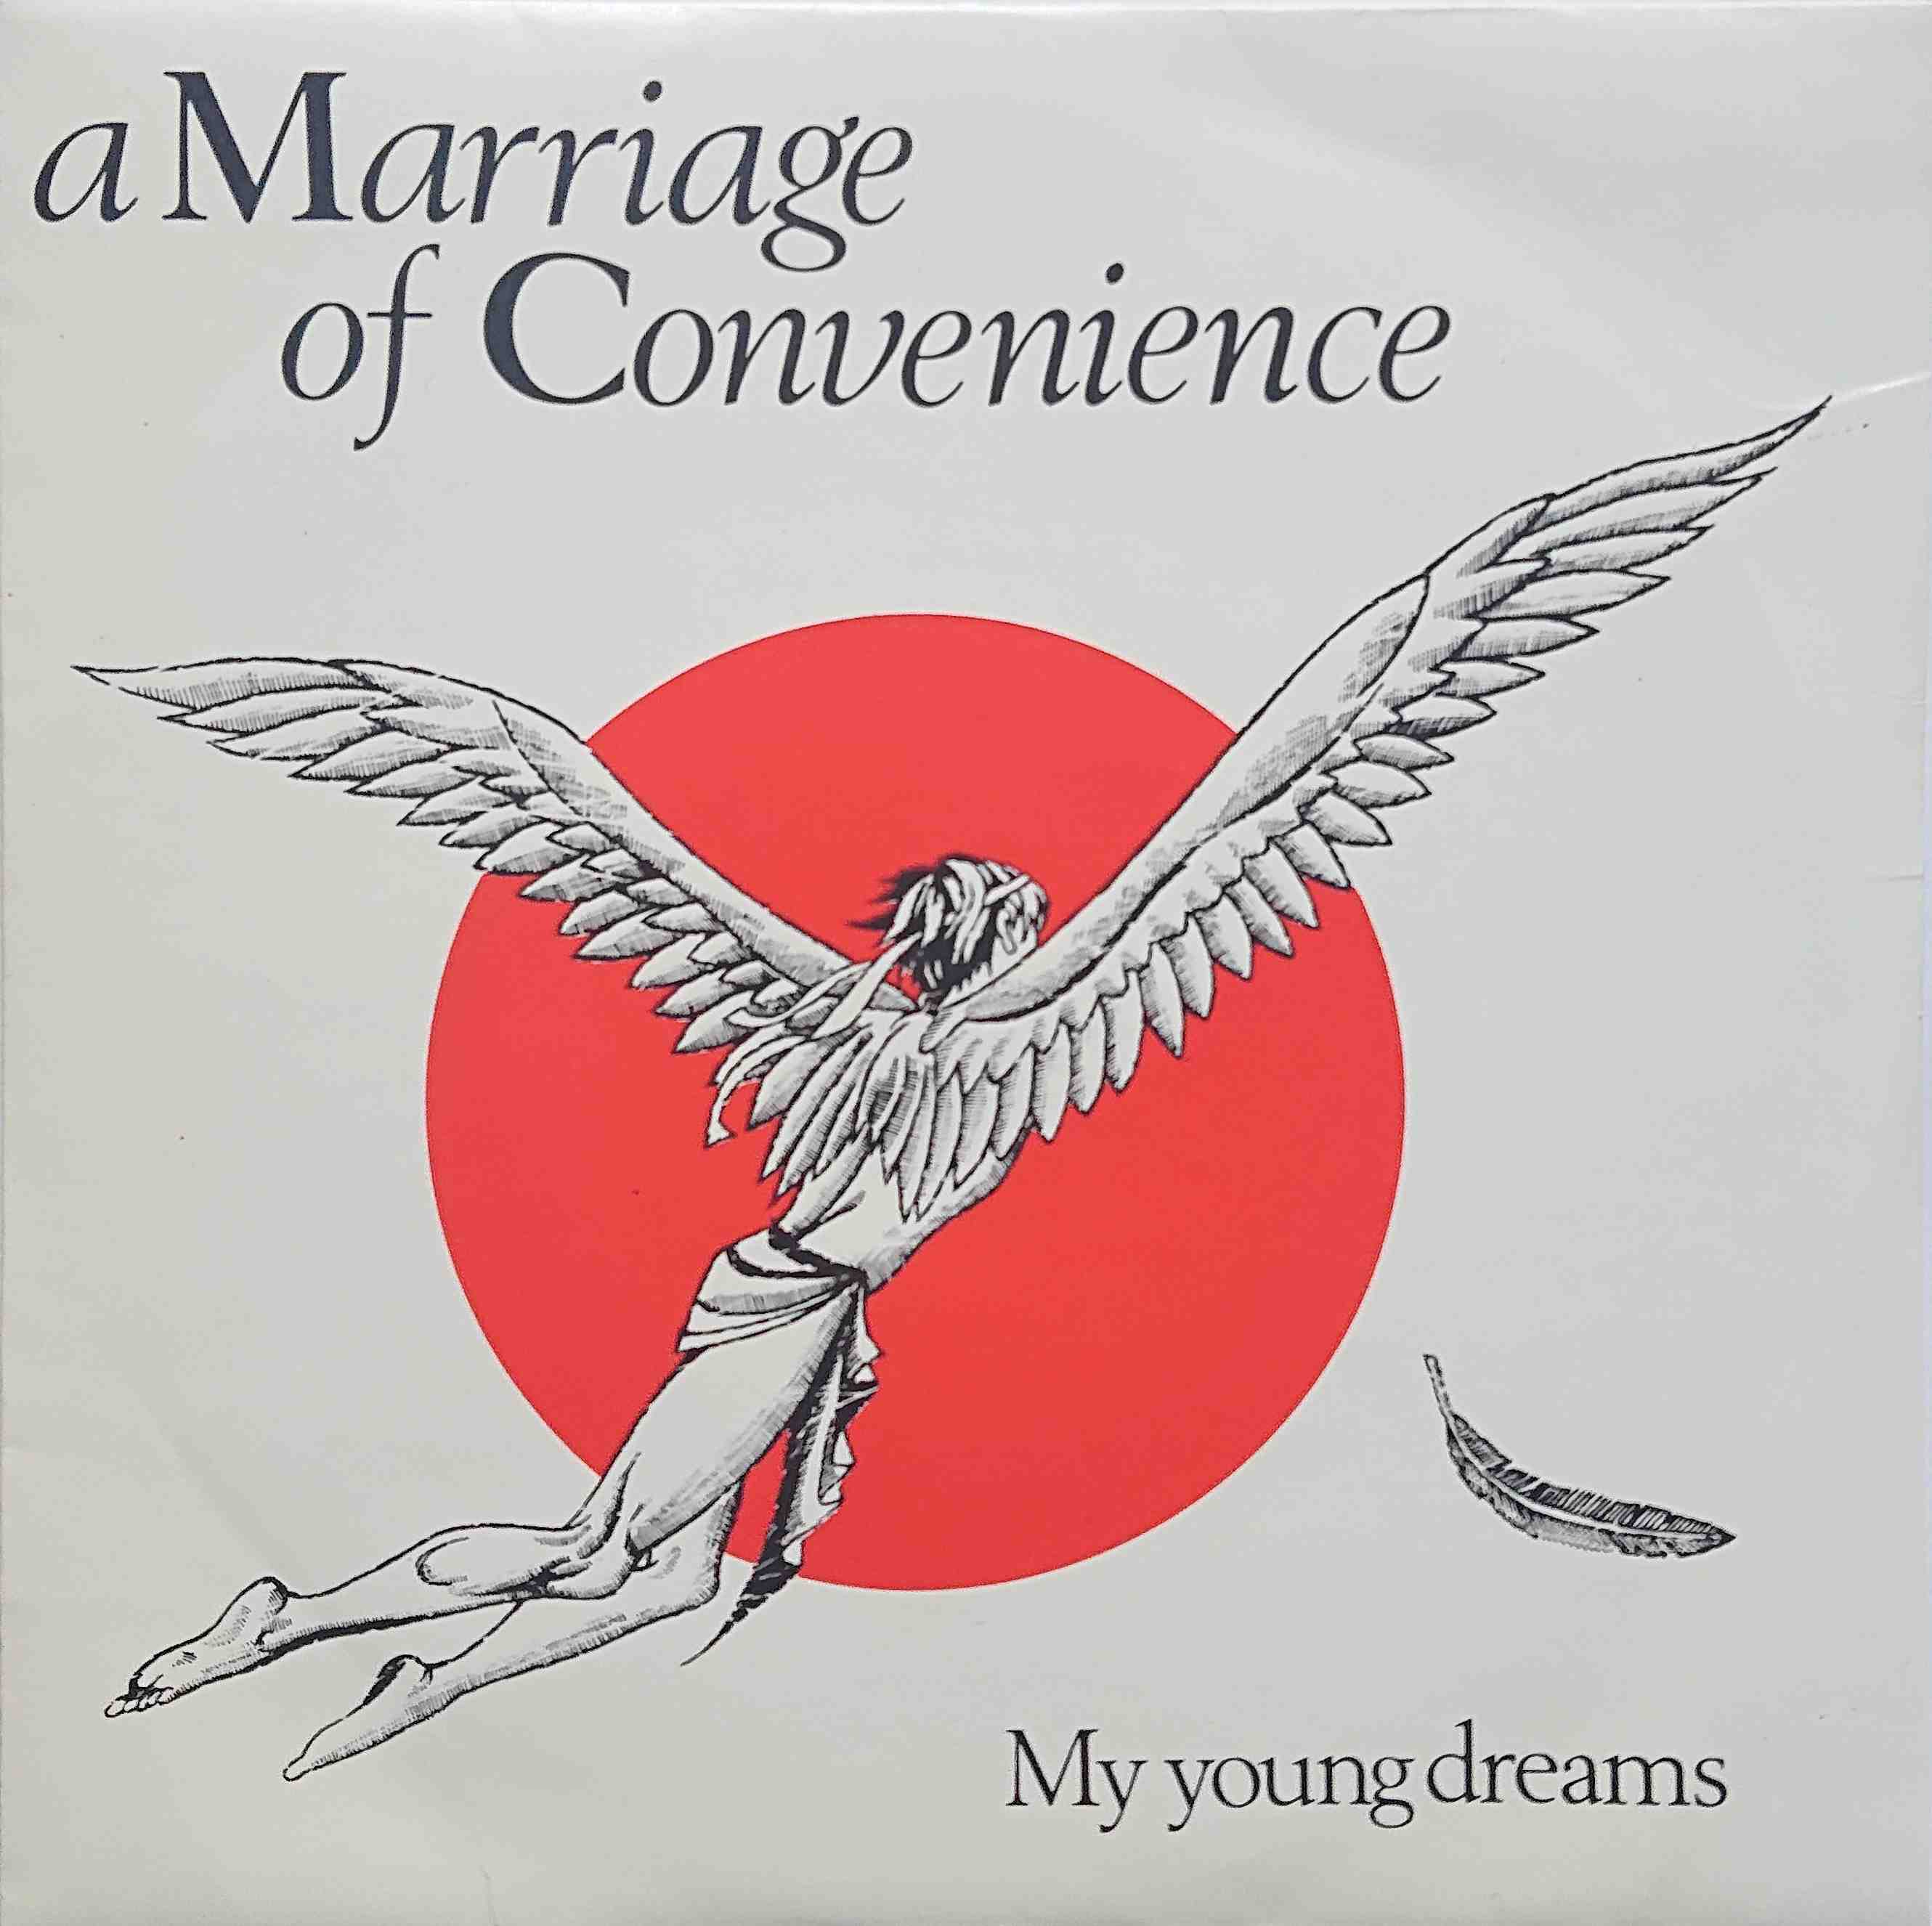 Picture of My young dreams by artist The Stranglers from The Stranglers singles